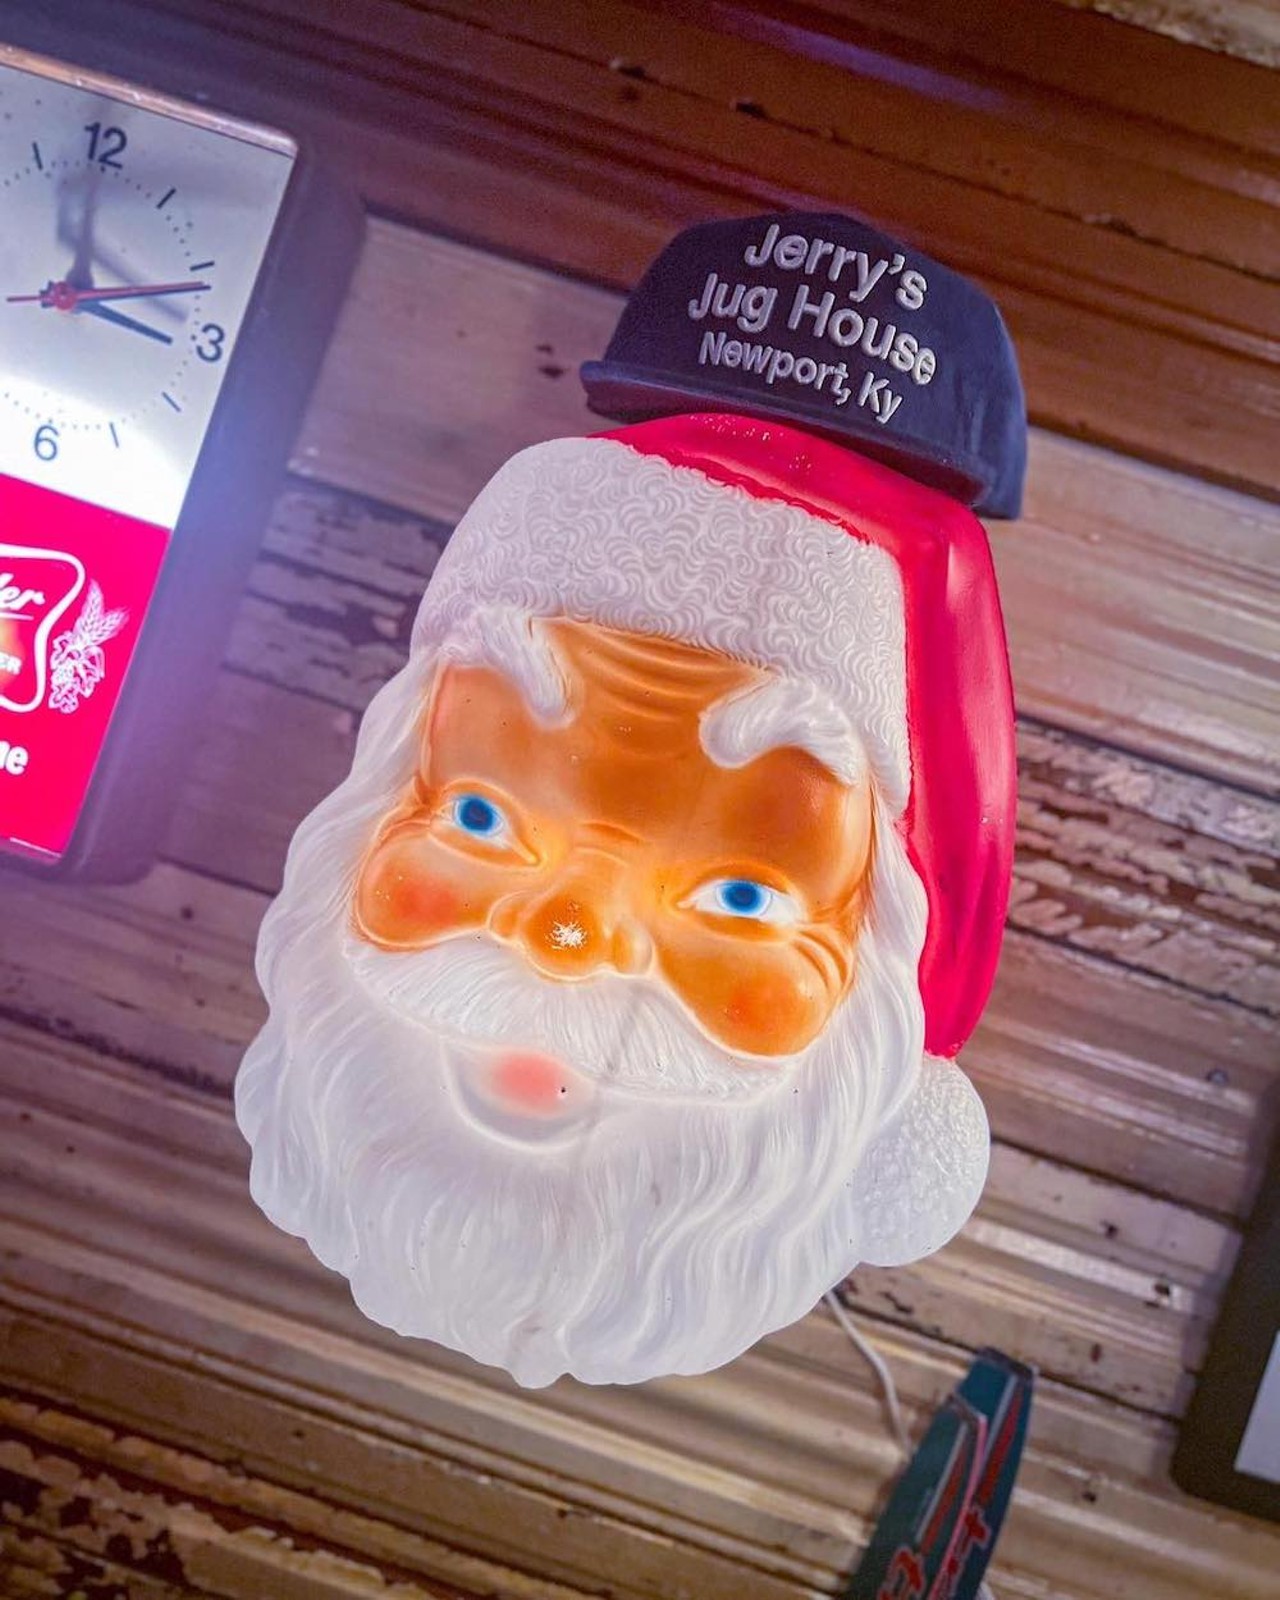 Jerry’s Jug House
414 E. Seventh St., Newport
This Newport bar has the holidaze decor out, and Great Lakes’ Christmas Ale on tap. They also have a special “Jerry’s Jug House” hat for sale during the holiday season.